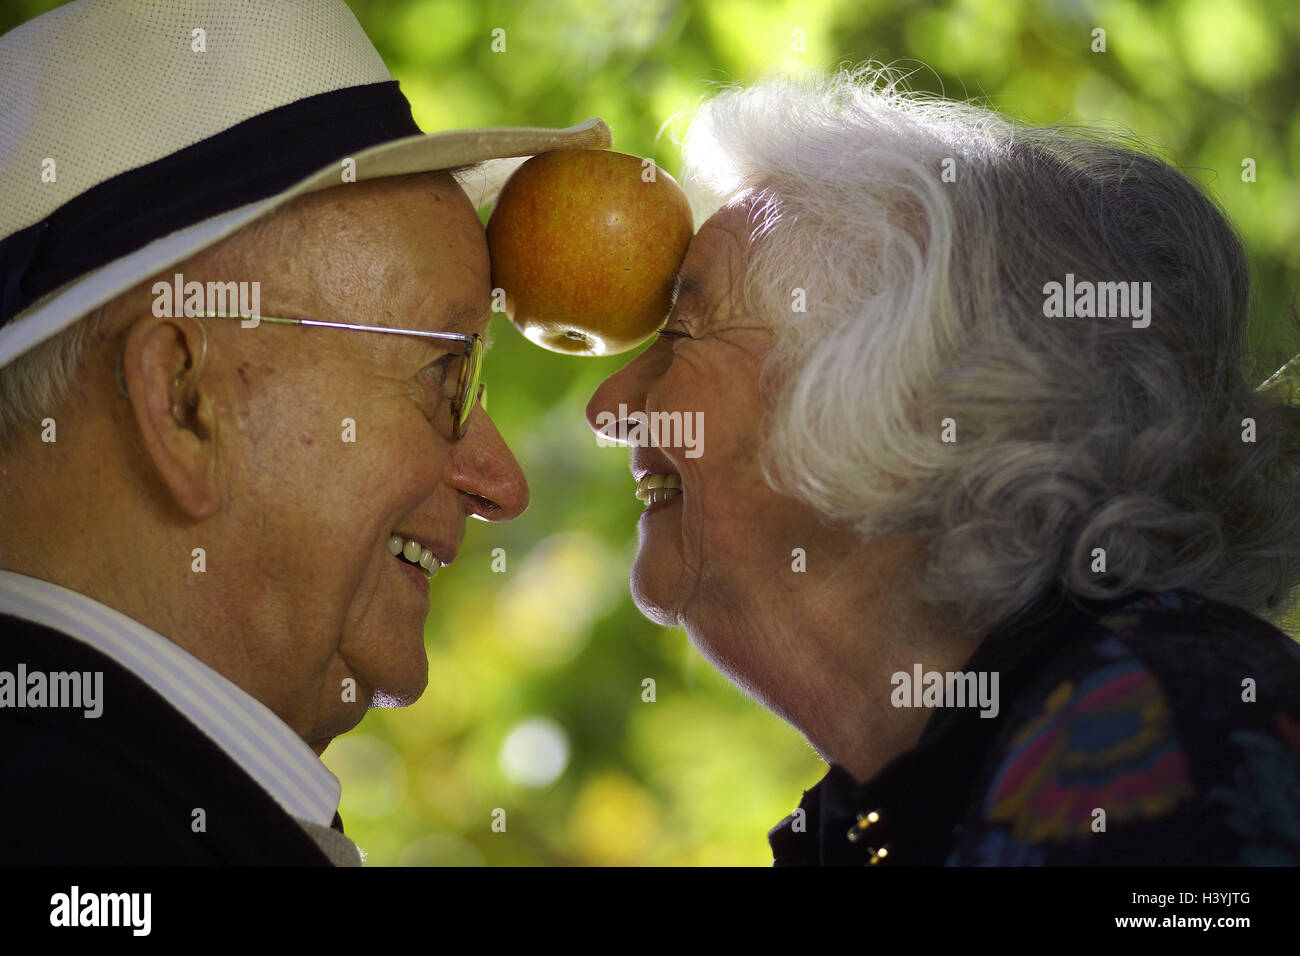 Senior couple, happy, eye contact, forehead, apple, get caught, tread couple, senior citizens, partnership, Before, respect, happy, falls in love, love, affection, together, fun, joy life, gambles away, care, headgear, glasses, wearers glasses, park, garden, outside Stock Photo